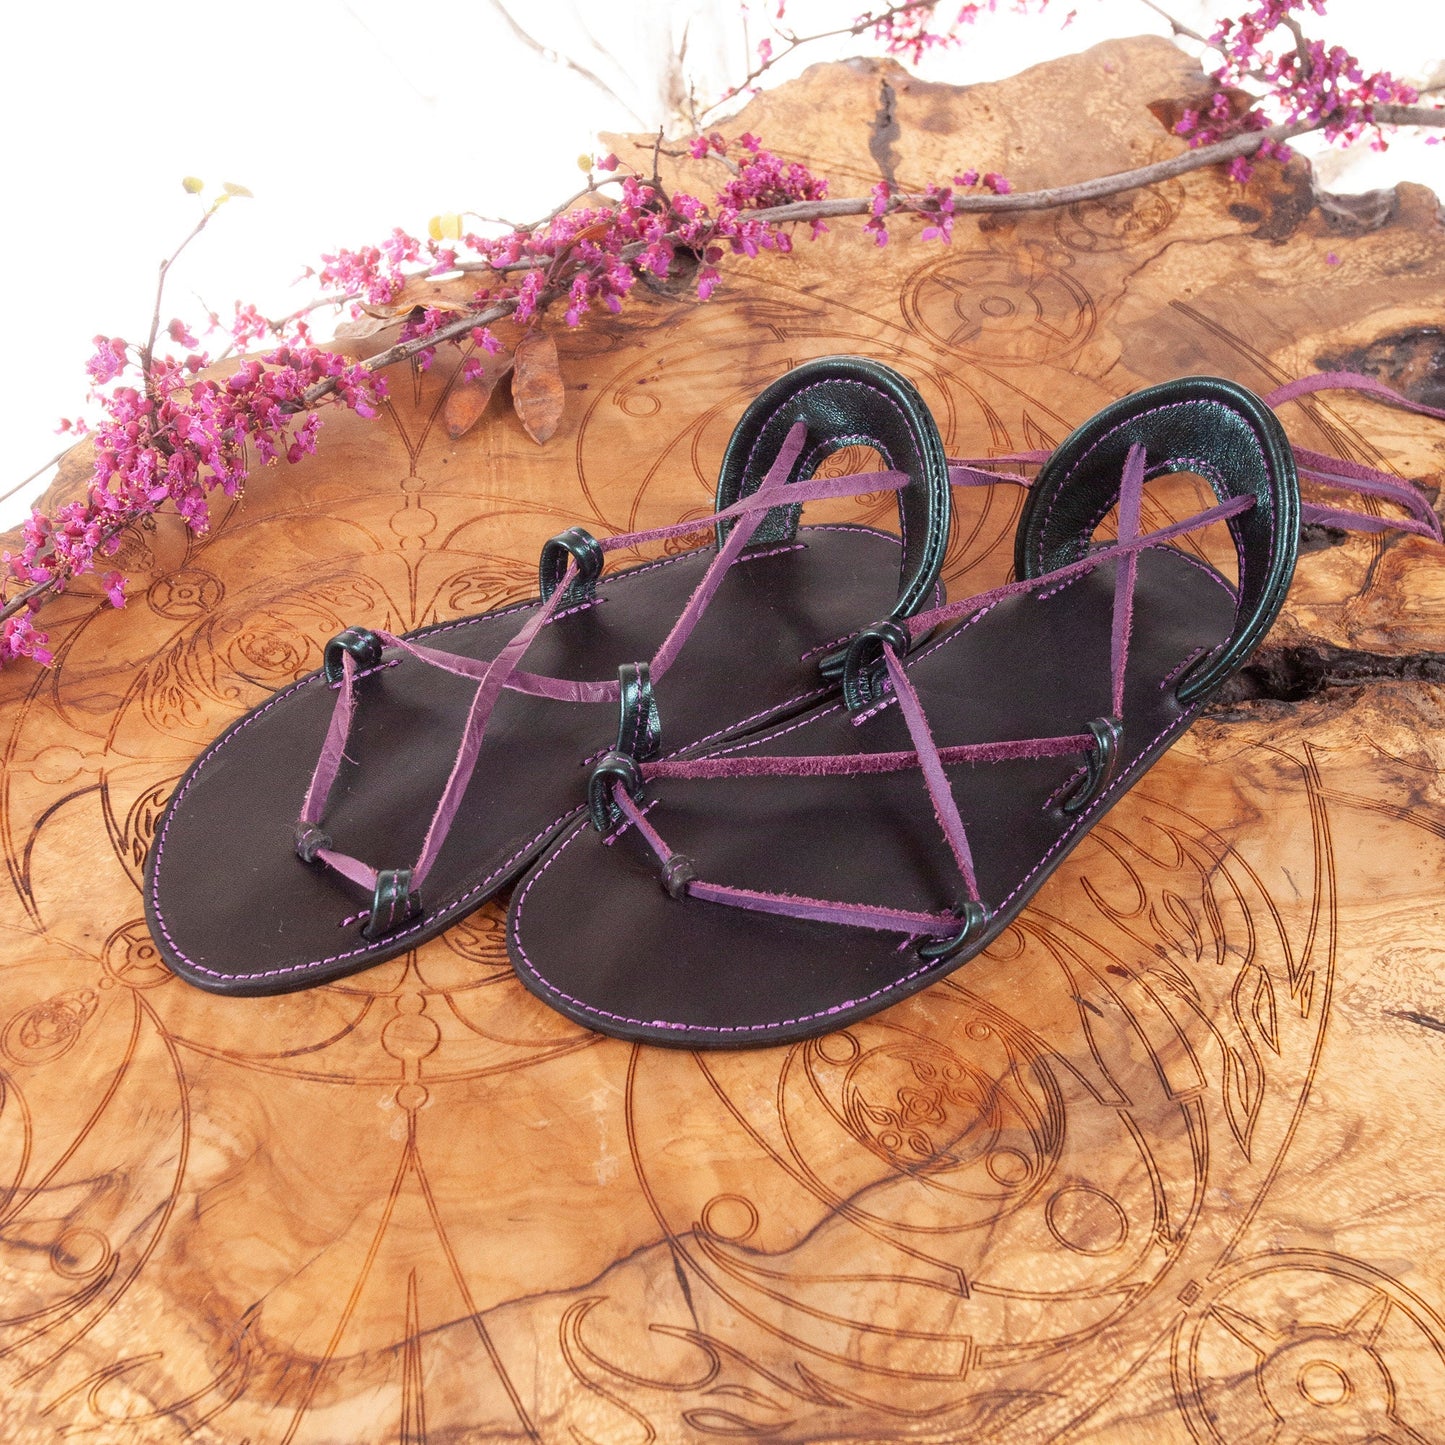 Size 7, IN STOCK, Oasis Dance, Oasis, Grecian Sandals, Leather Sandals, Sandals, Greek Sandals, Goddess Sandals, Barefoot Sandals, EU 37